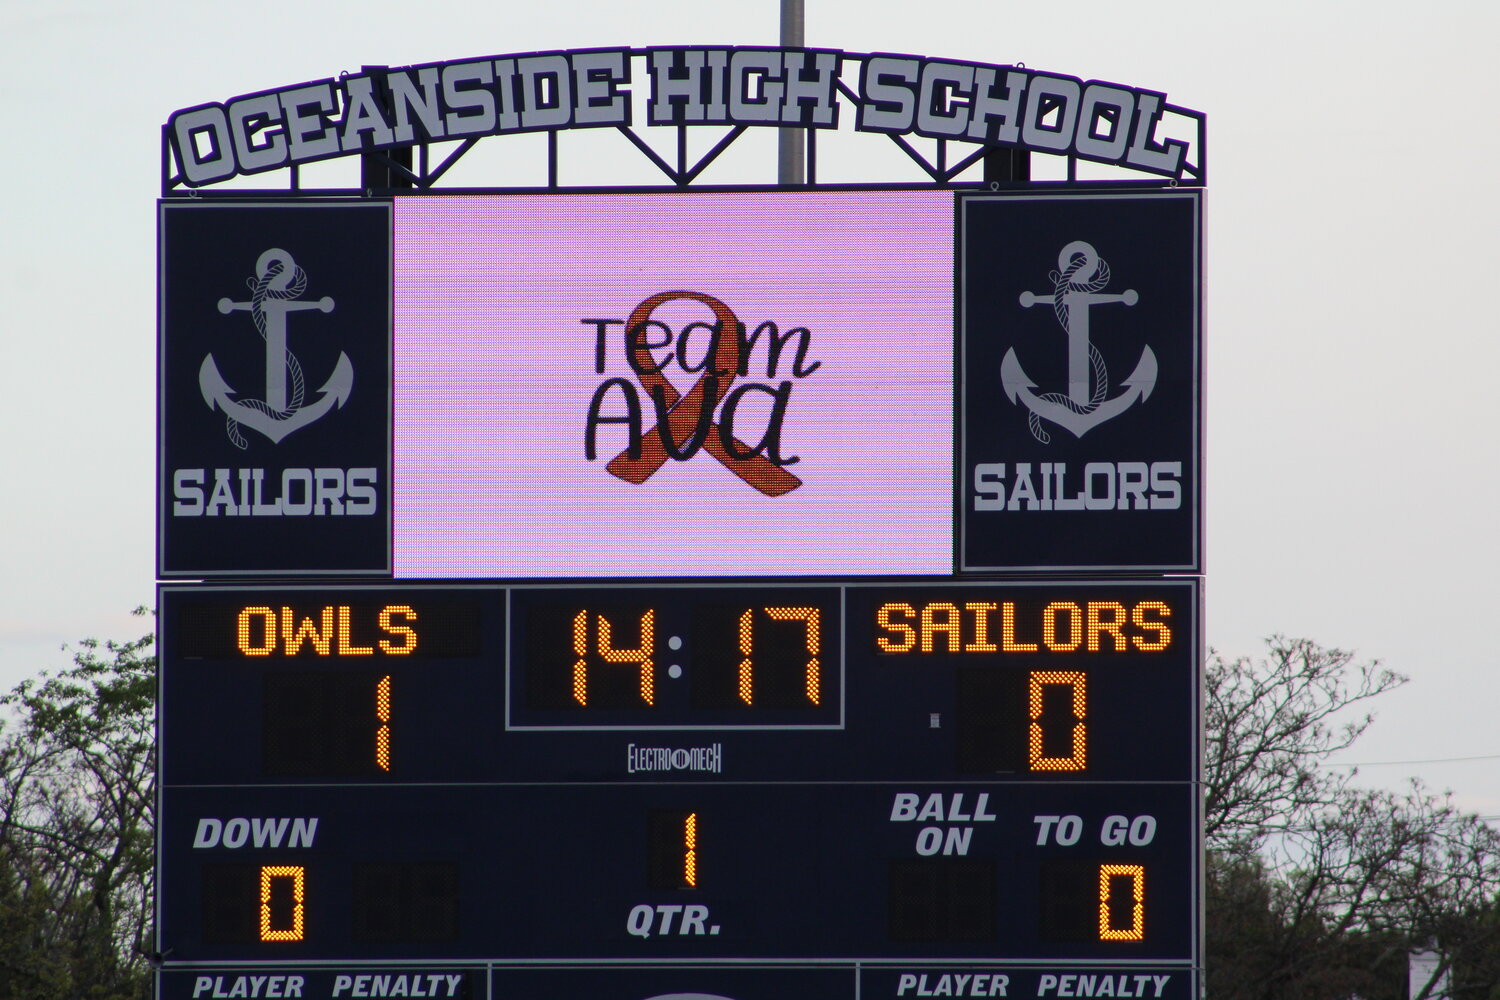 'Team Ava' was displayed on the scoreboard throughout the game in support of ill player Ava Salonia.